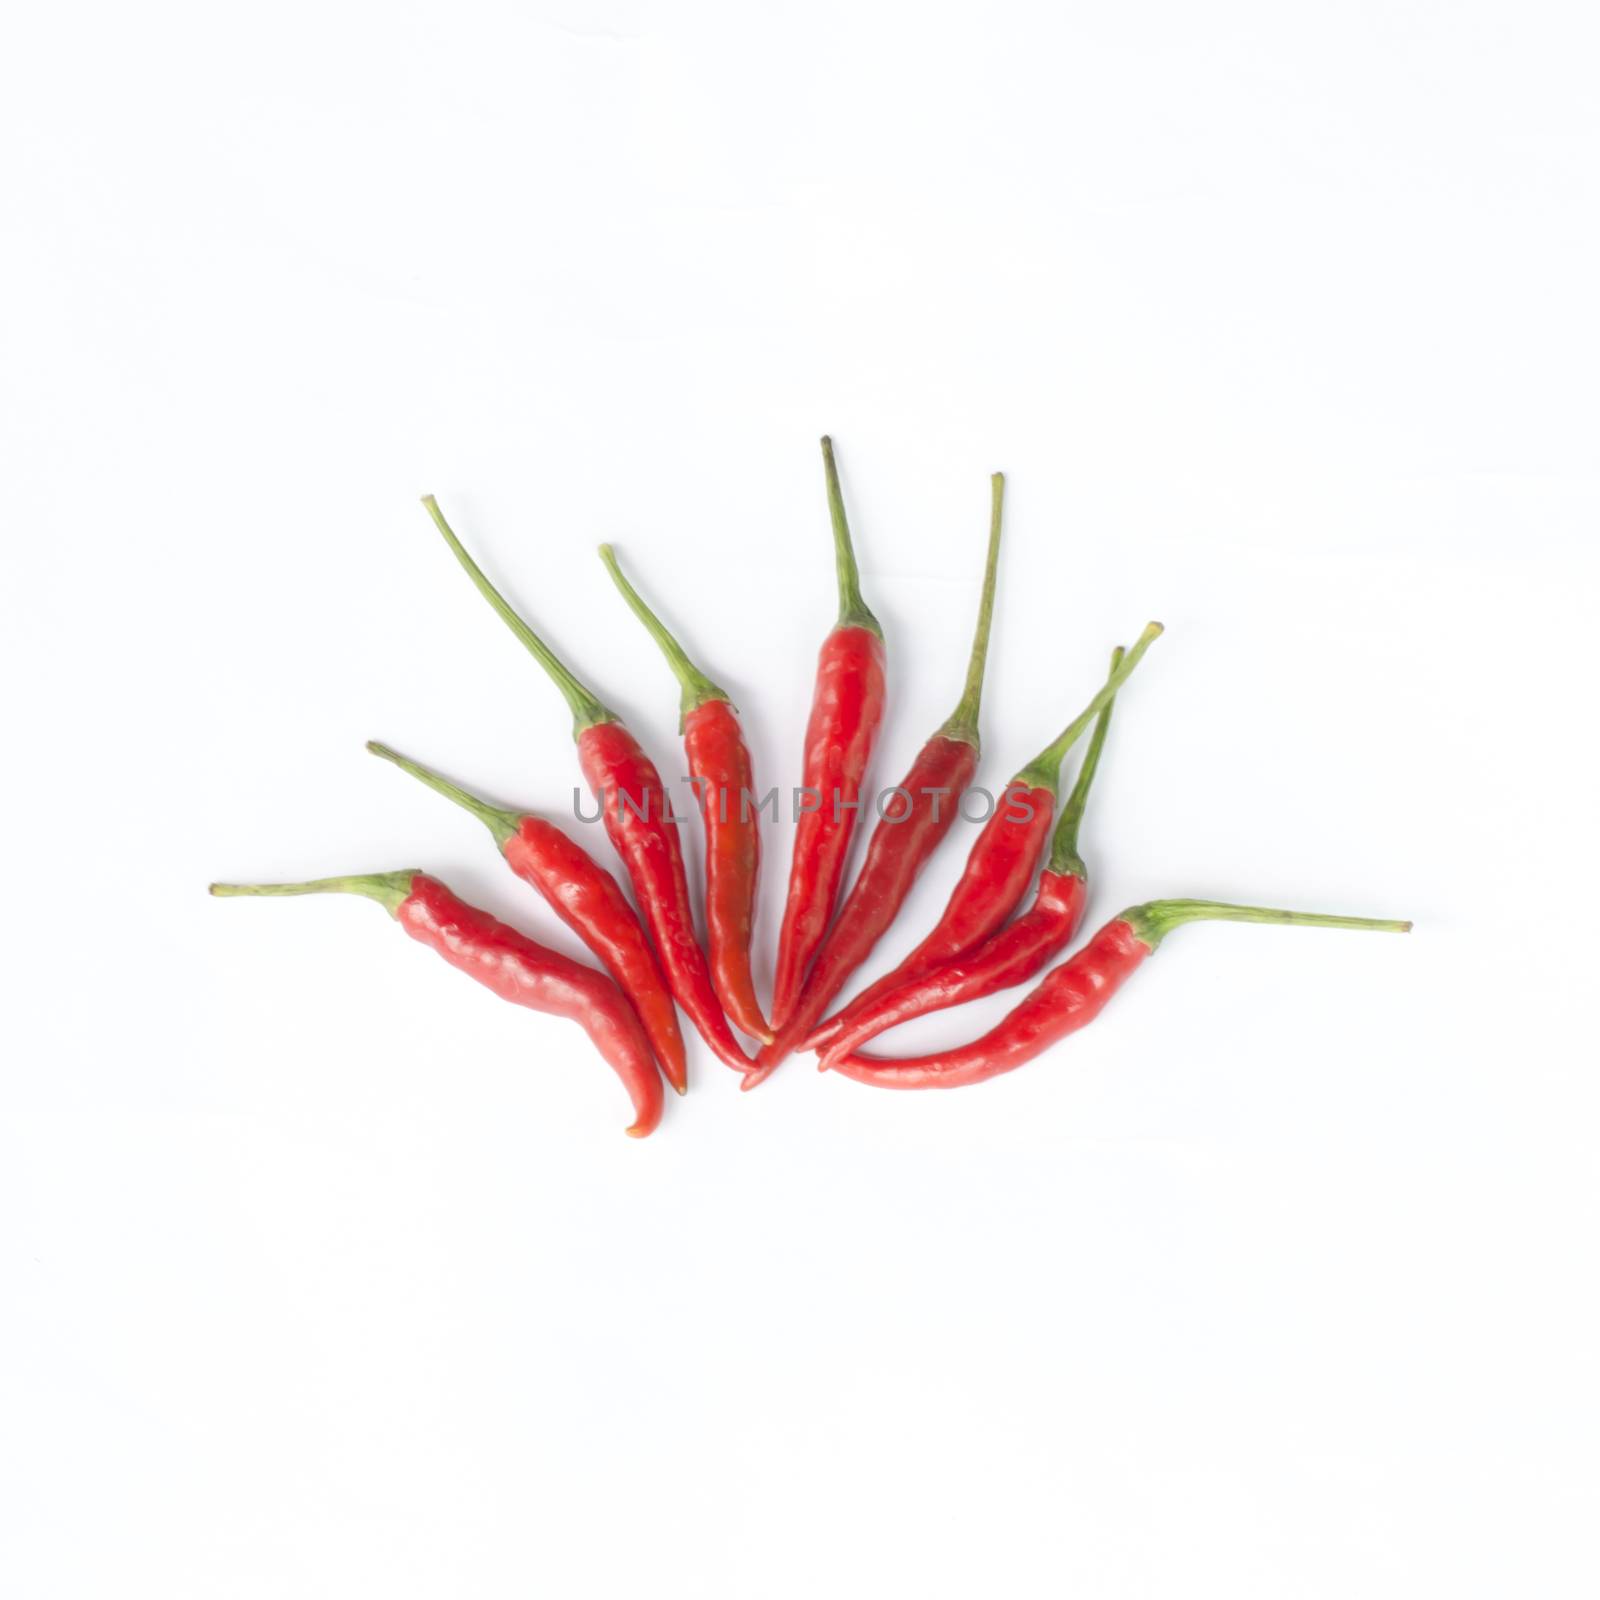 pepper isolated on white by ammza12